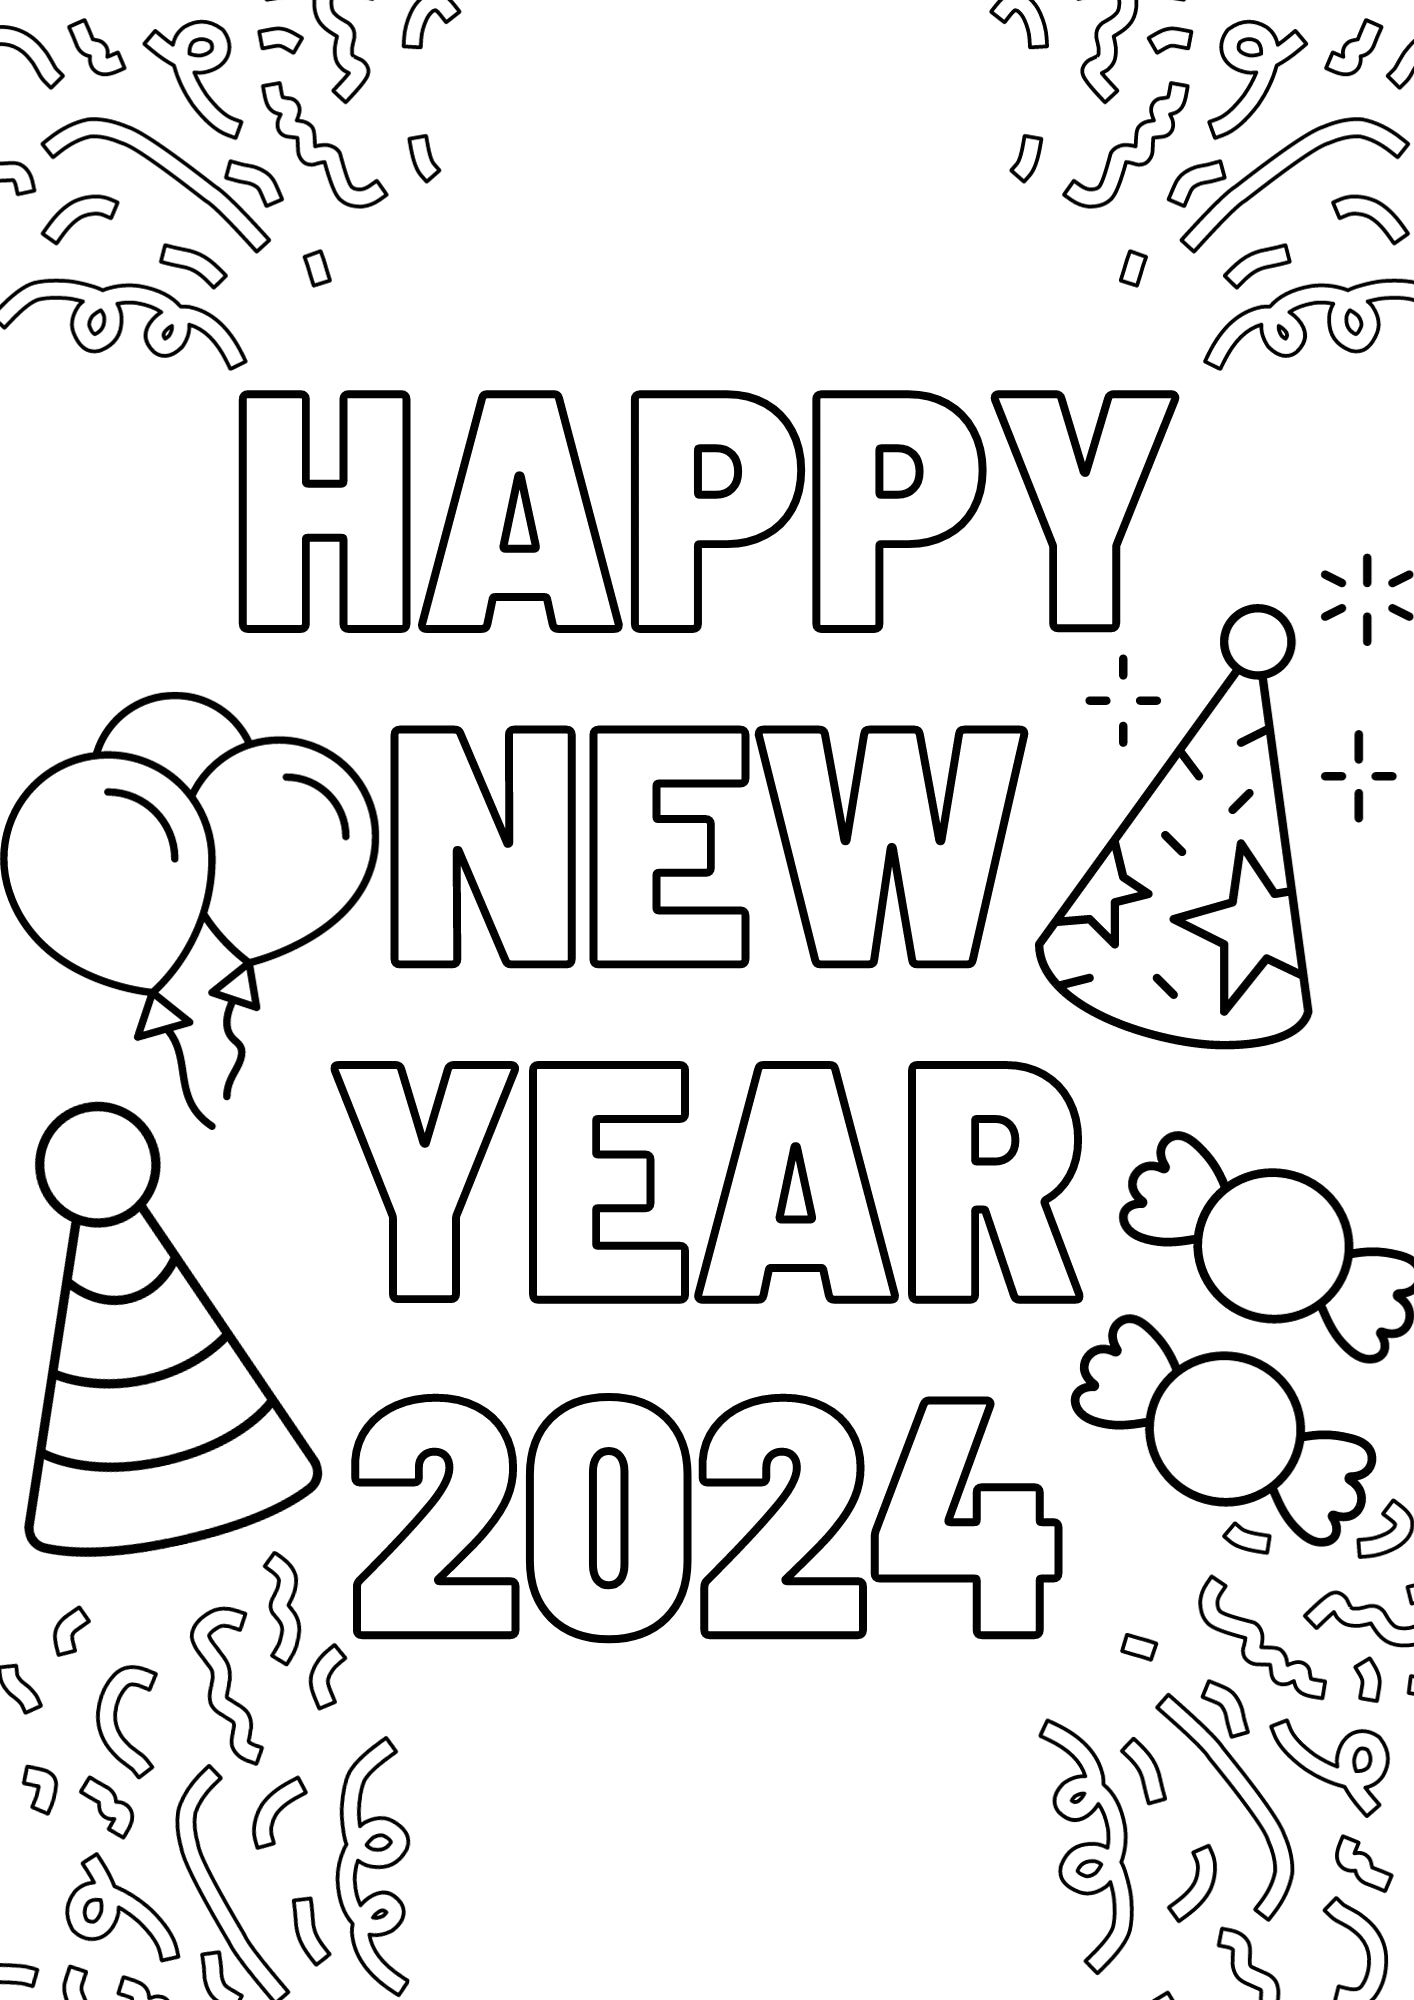 New Year 2024 Colouring Page Digital Download Resource